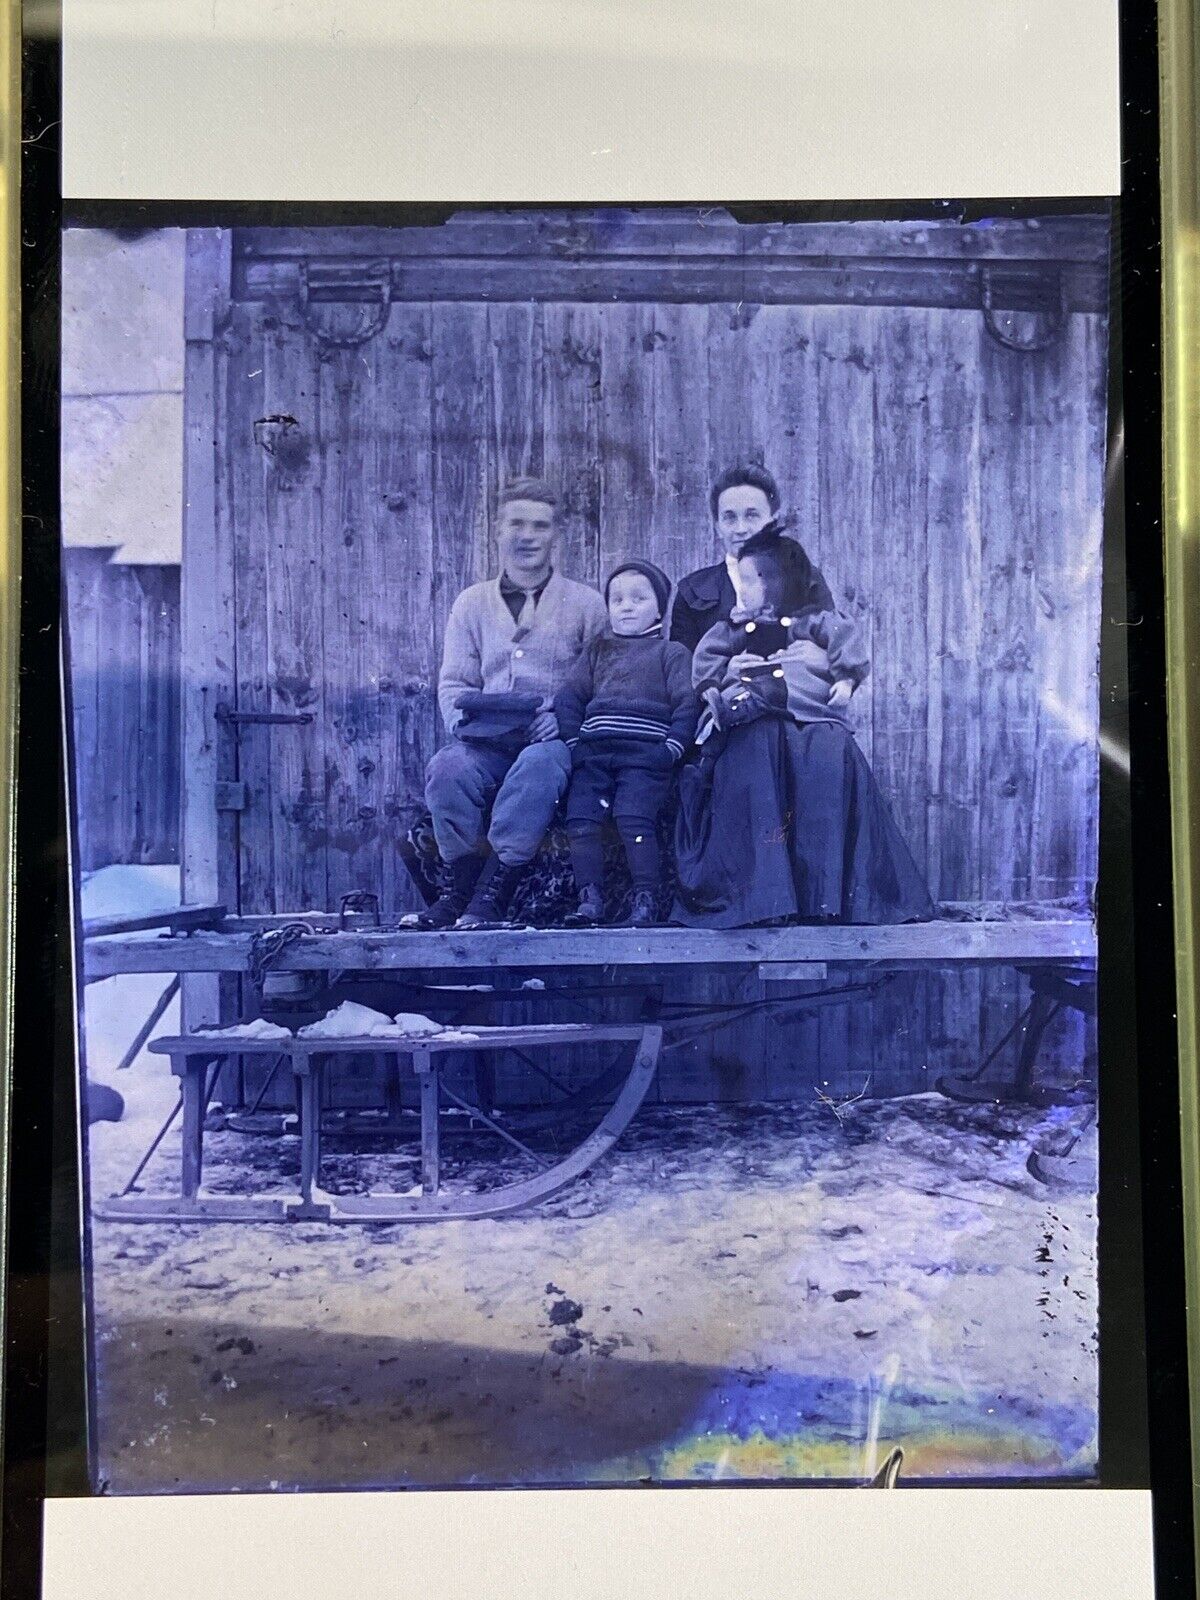 Antique 4x5 Glass Plate Negative Family On A Sleigh In The Winter F7BAK